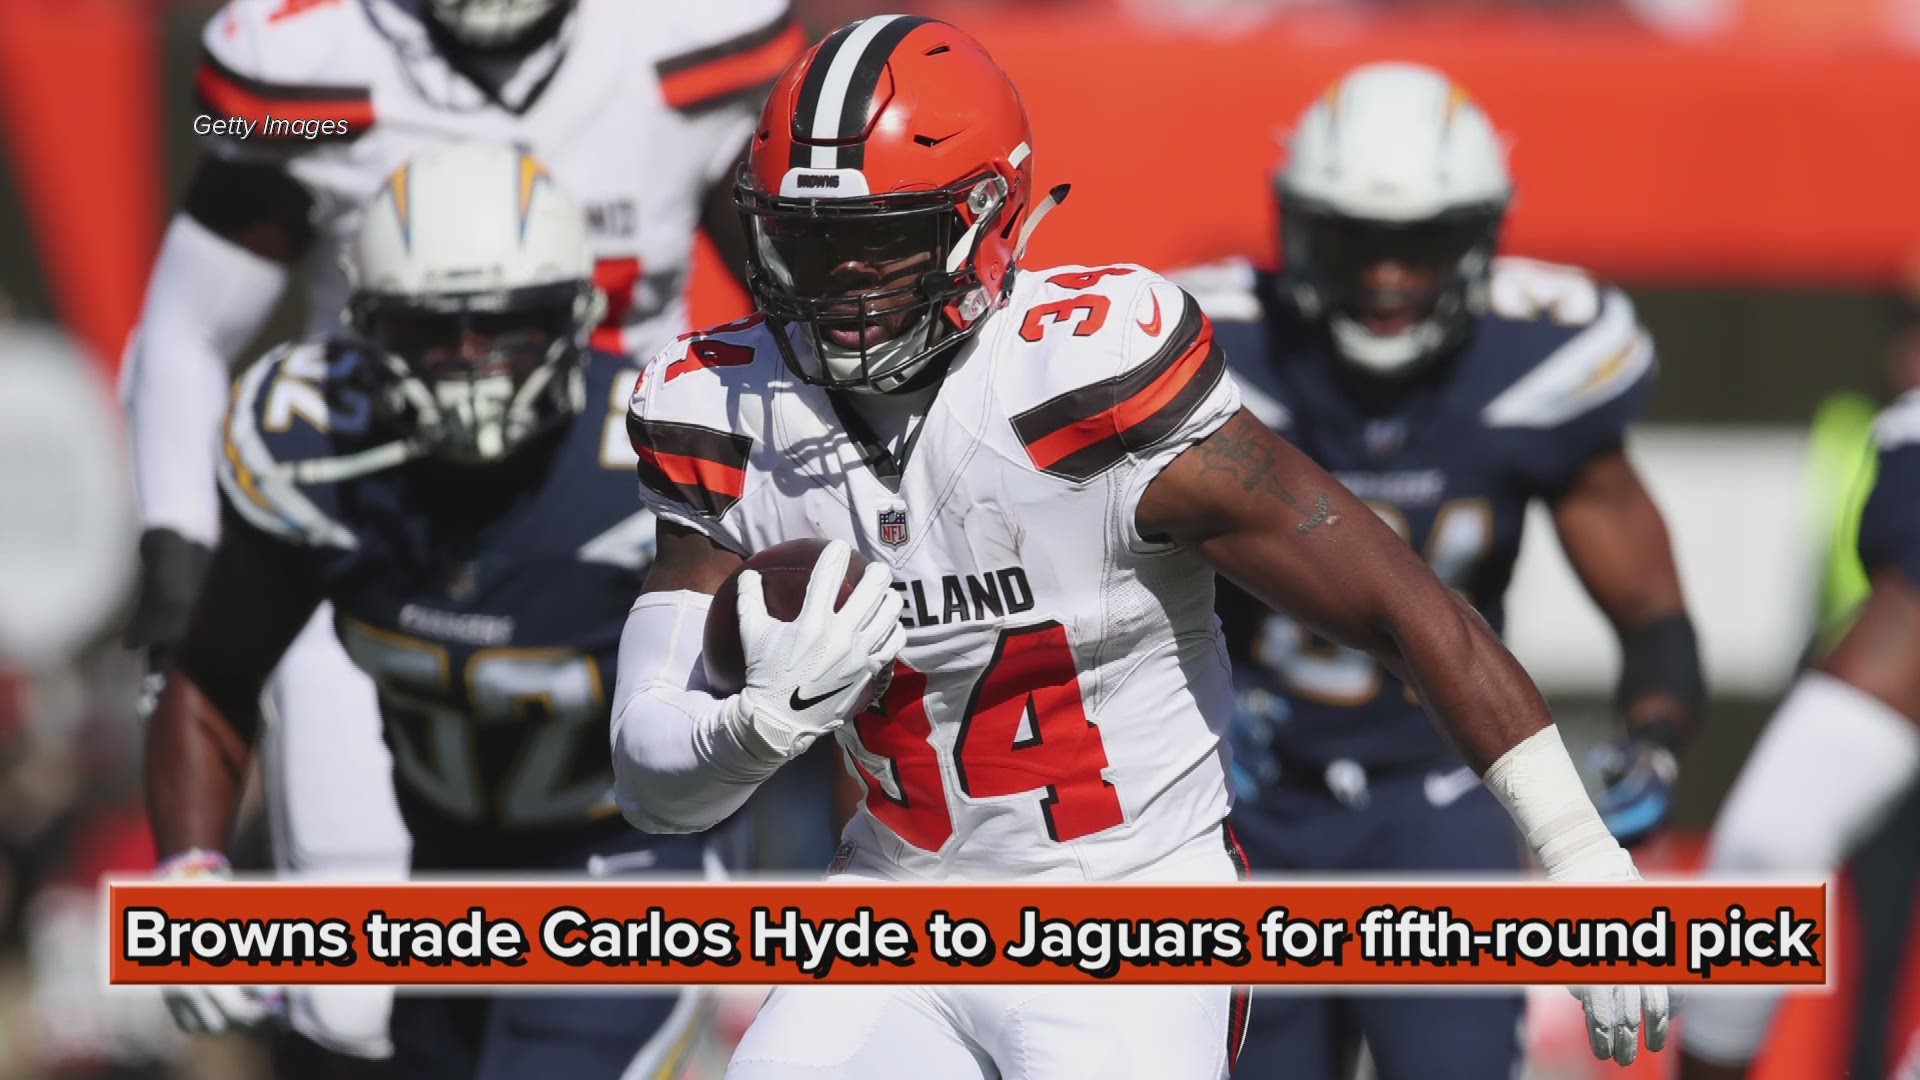 Cleveland Browns trade RB Carlos Hyde to Jacksonville Jaguars for fifth-round pick